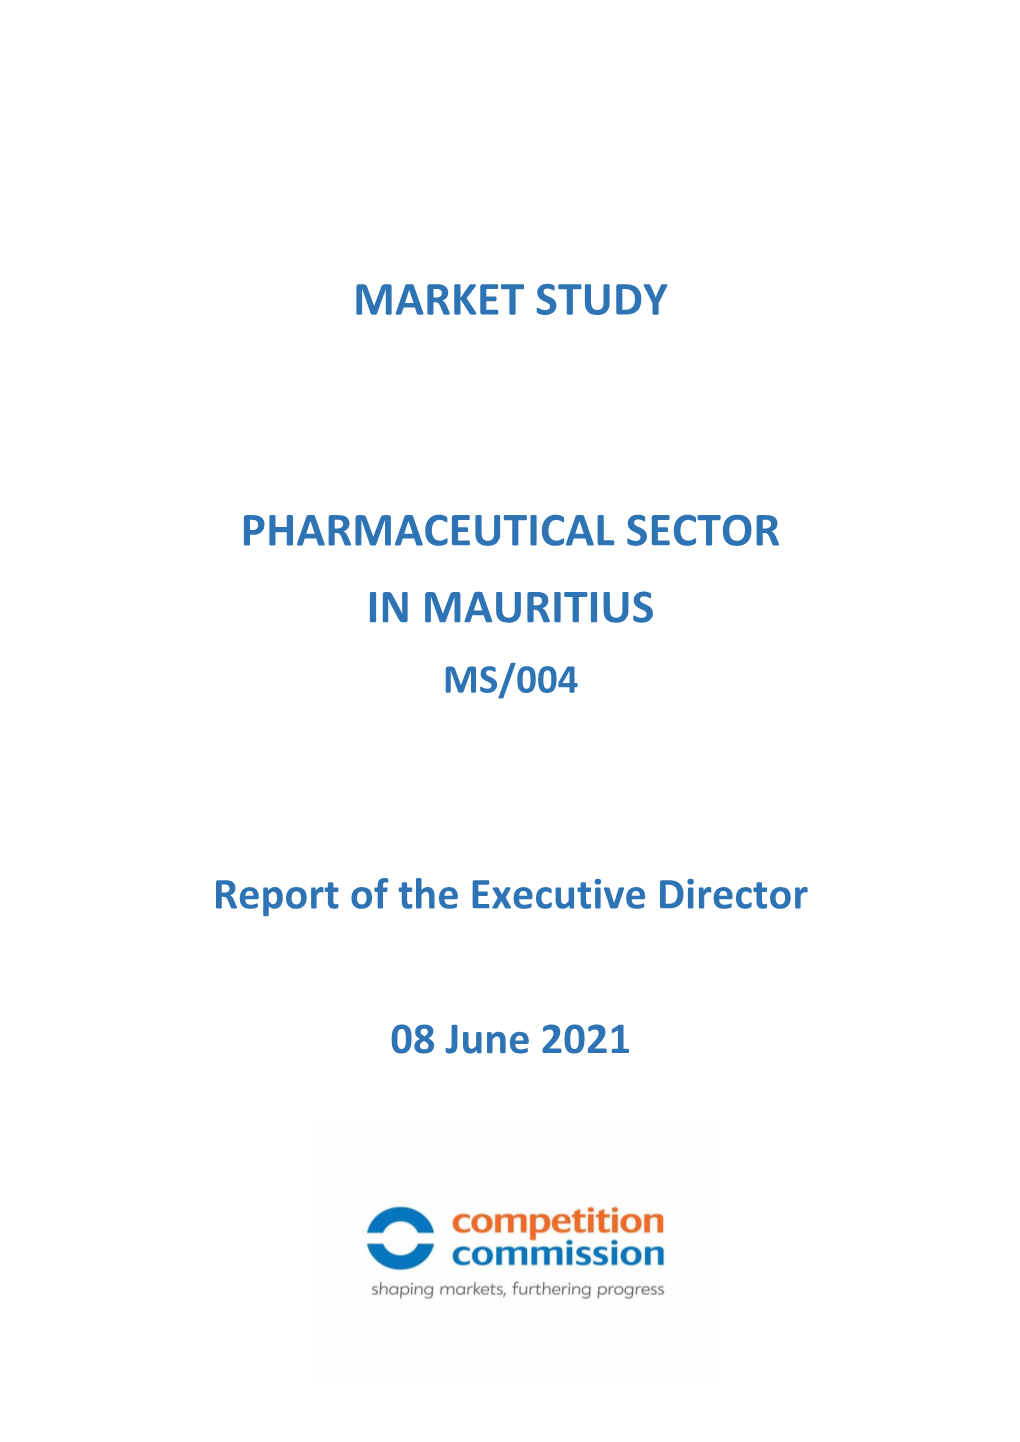 Market Study Pharmaceutical Sector in Mauritius